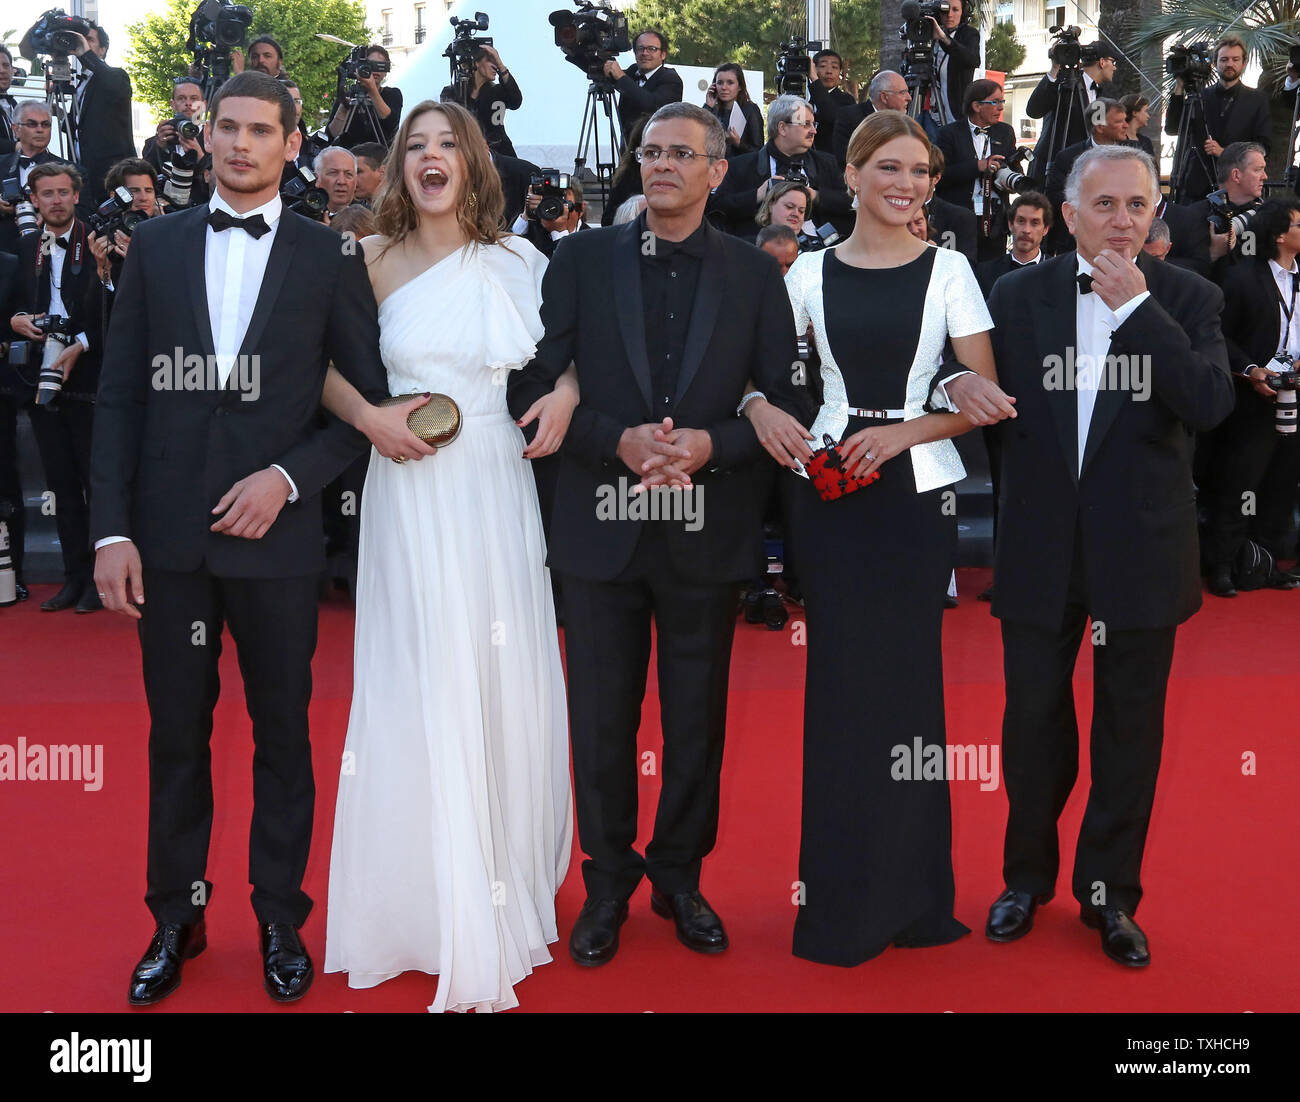 (From L to R) Jeremie Laheurte, Adele Exarchopoulos, Abdellatif Kechiche, Lea Seydoux and Brahim Chioua arrive on the red carpet before the screening of the film 'Zulu' during the 66th annual Cannes International Film Festival in Cannes, France on May 26, 2013.  UPI/David Silpa Stock Photo